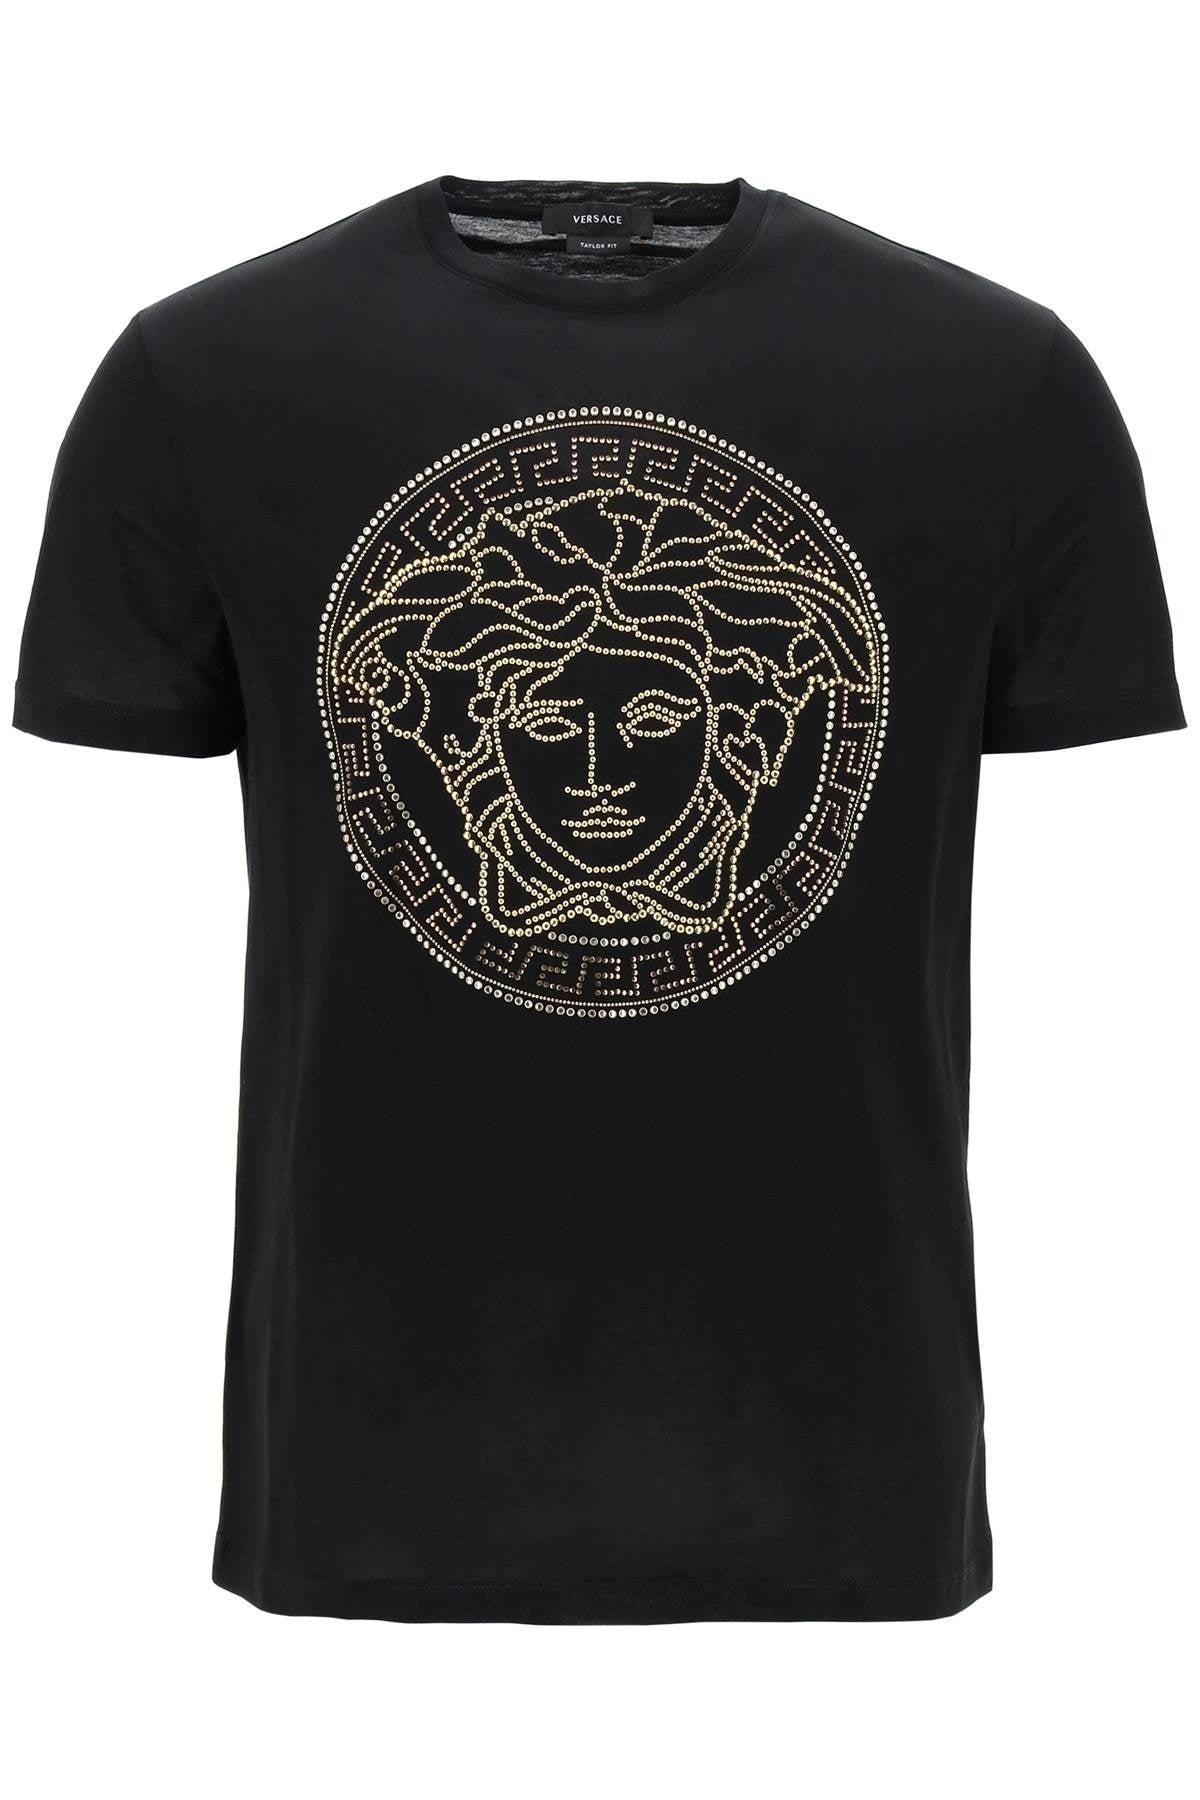 Versace Cotton Medusa Taylor Fit T-shirt in Black for Men | Lyst Canada